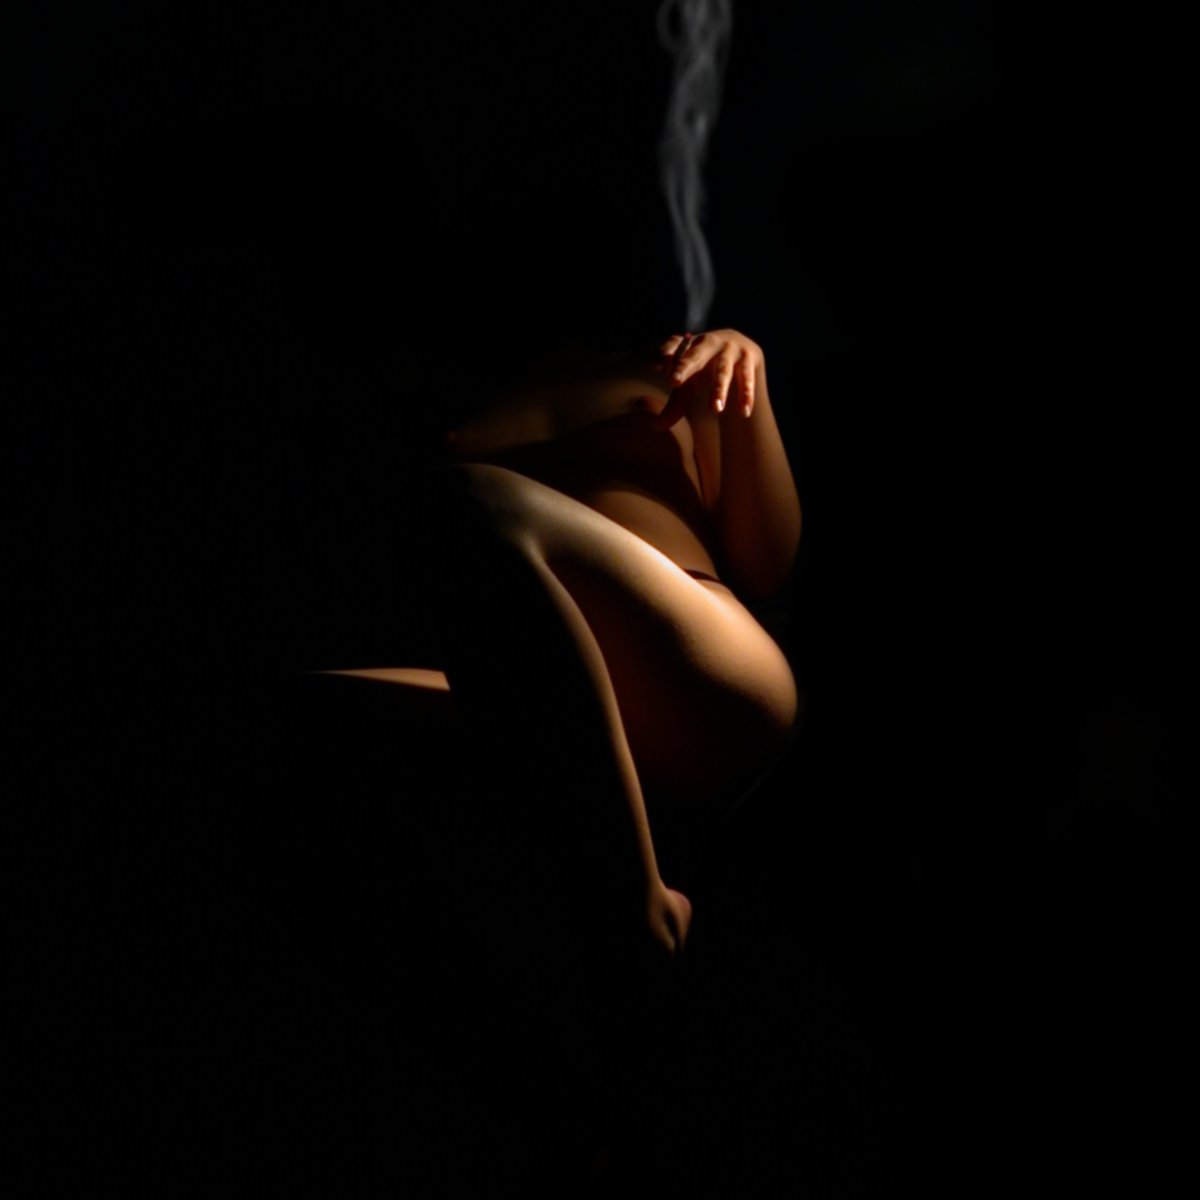  woman smoking a cigarette with dark background